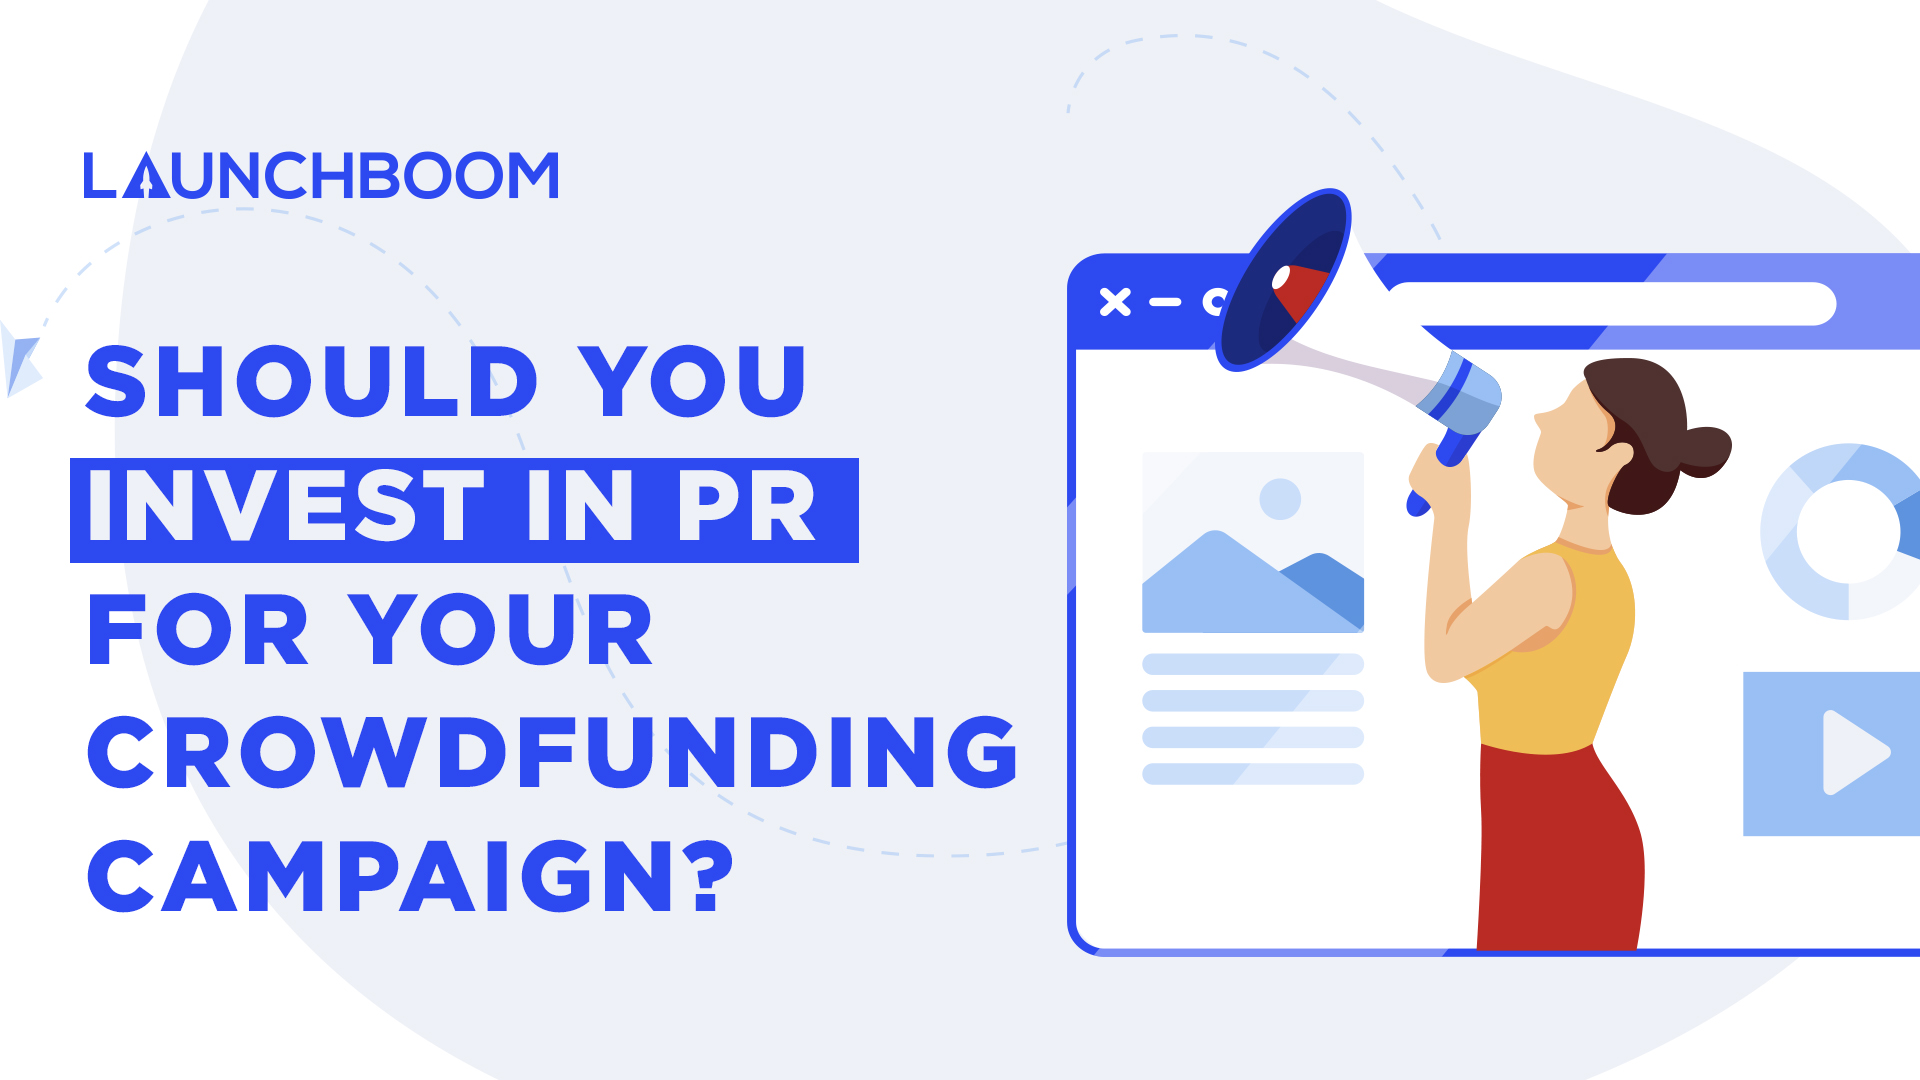 Should you invest in PR for your crowdfunding campaign?